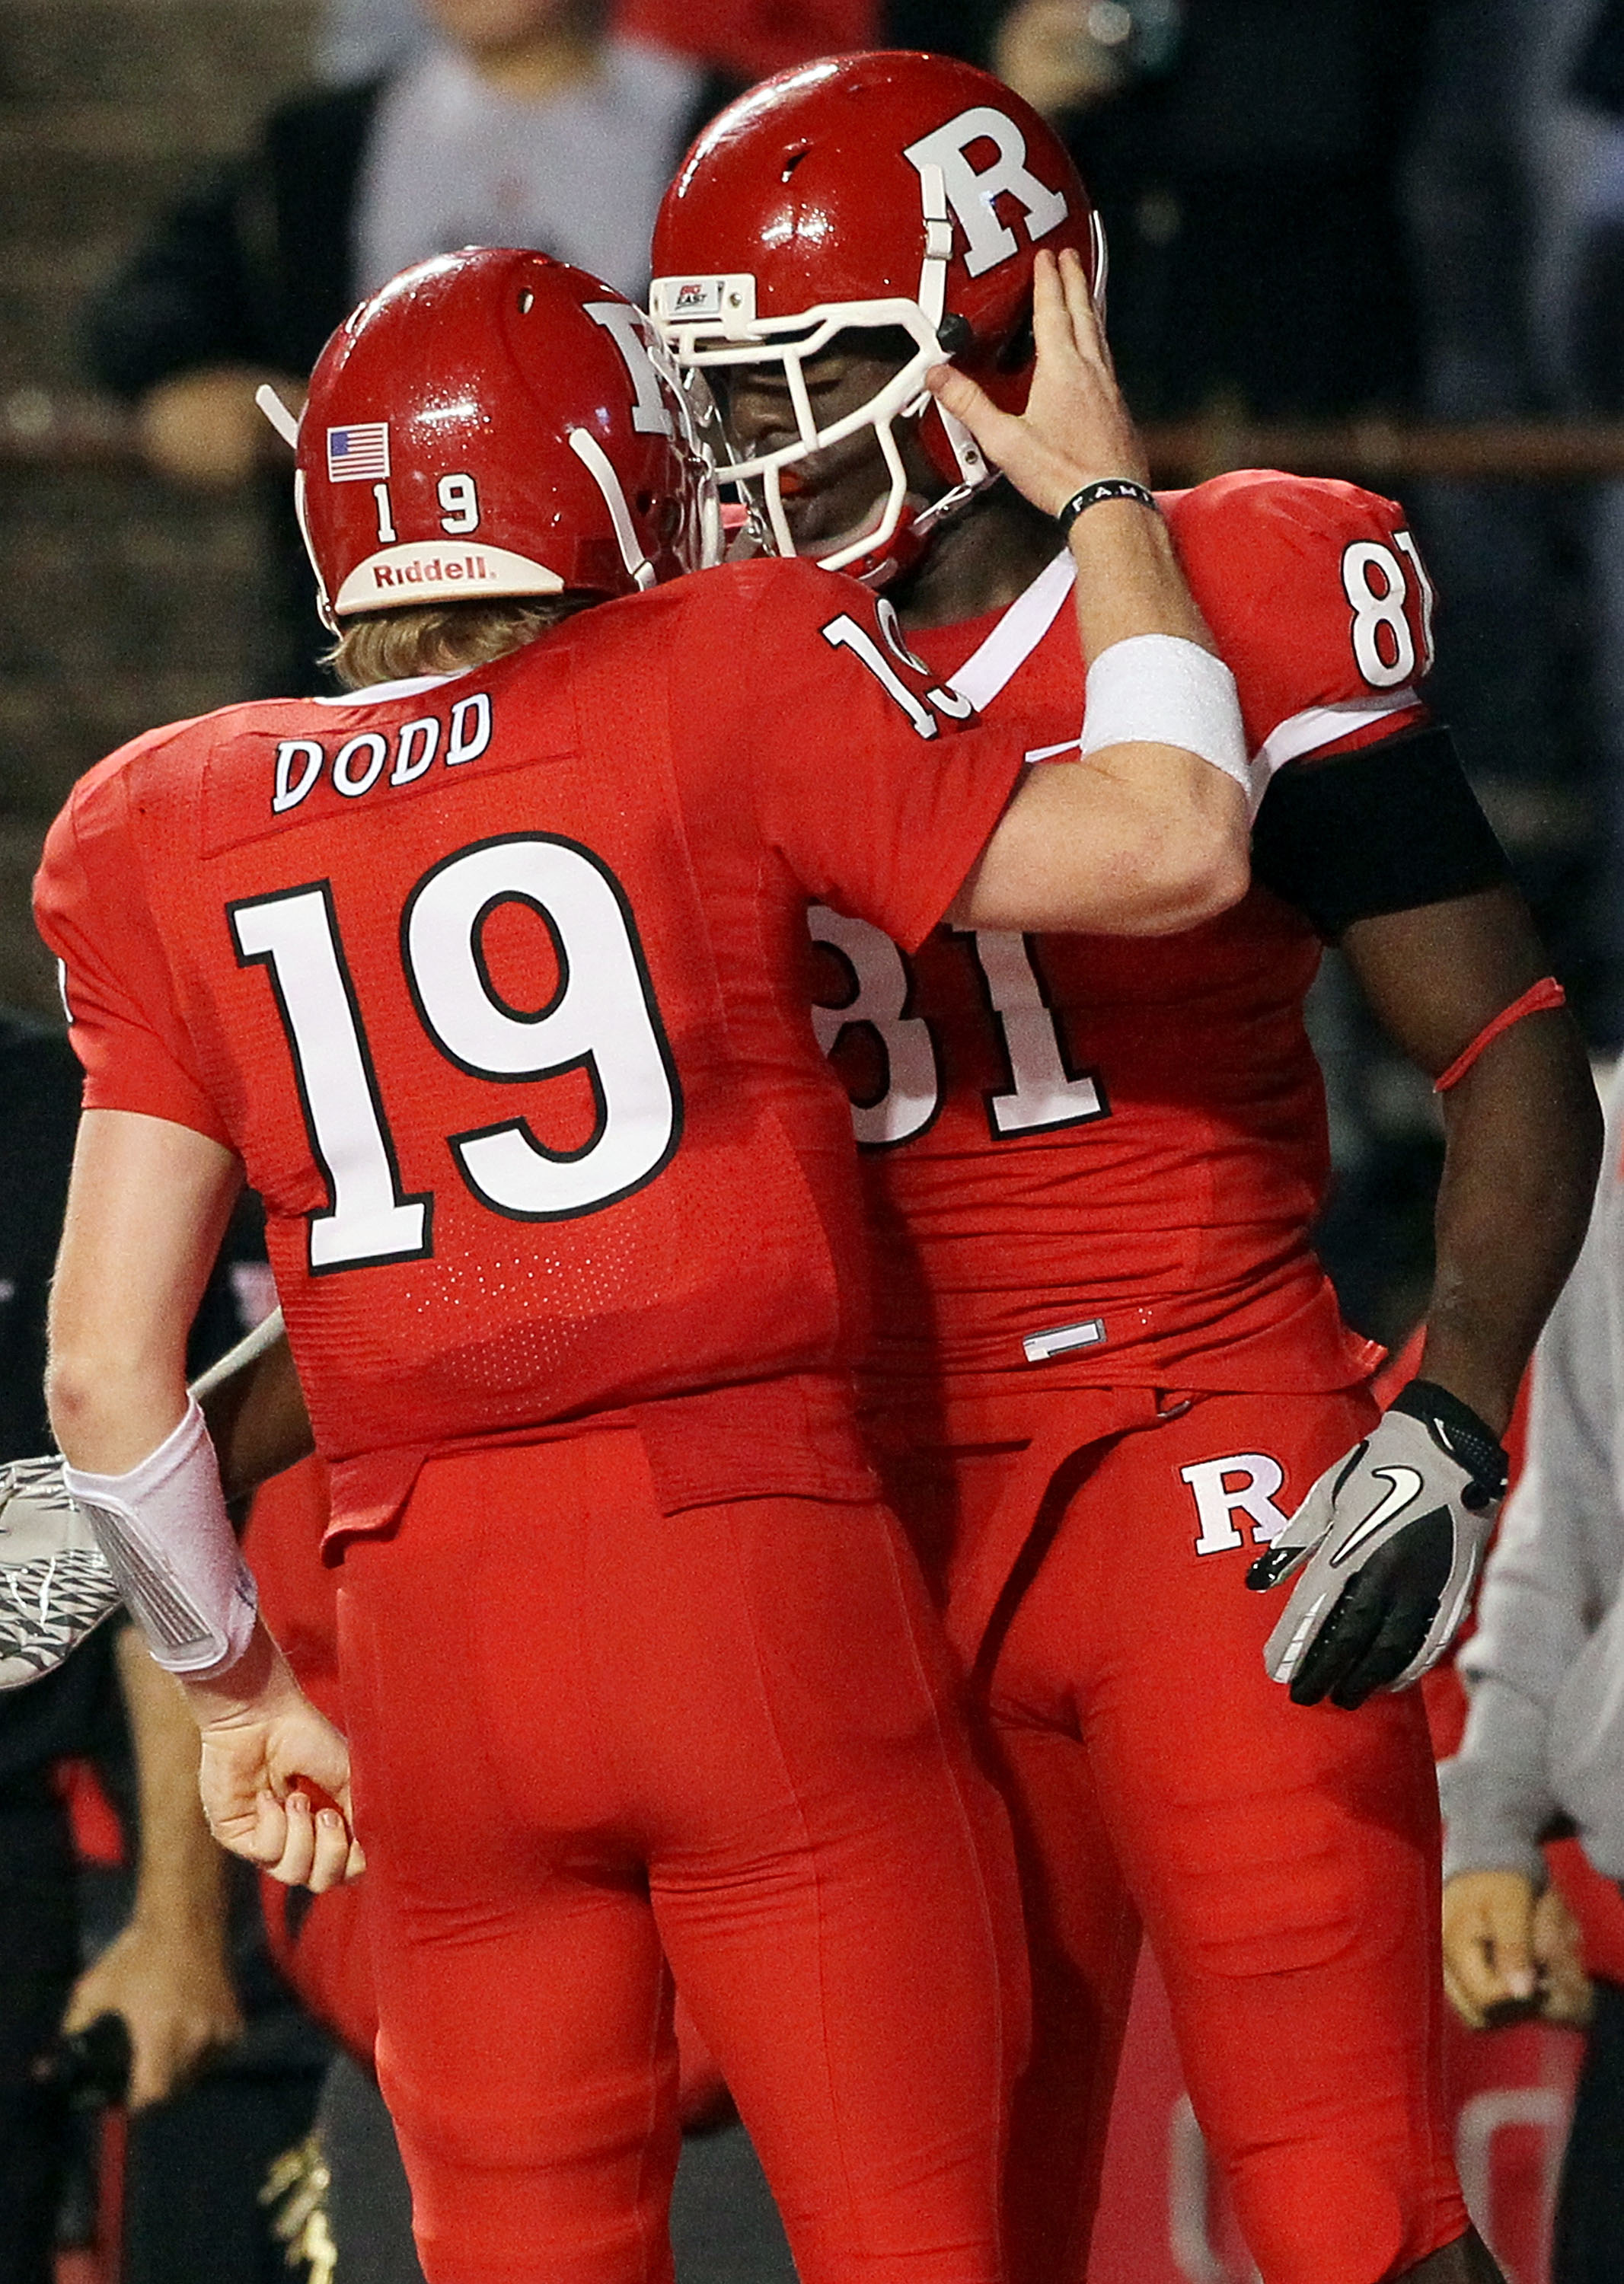 PISCATAWAY, NJ - OCTOBER 08:  Mark Harrison #81 of the Rutgers Scarlet Knights celebrates his game-tying touchdown against the Connecticut Huskies with teammate Chas Dodd #19 at Rutgers Stadium on October 8, 2010 in Piscataway, New Jersey. Rutgers defeate